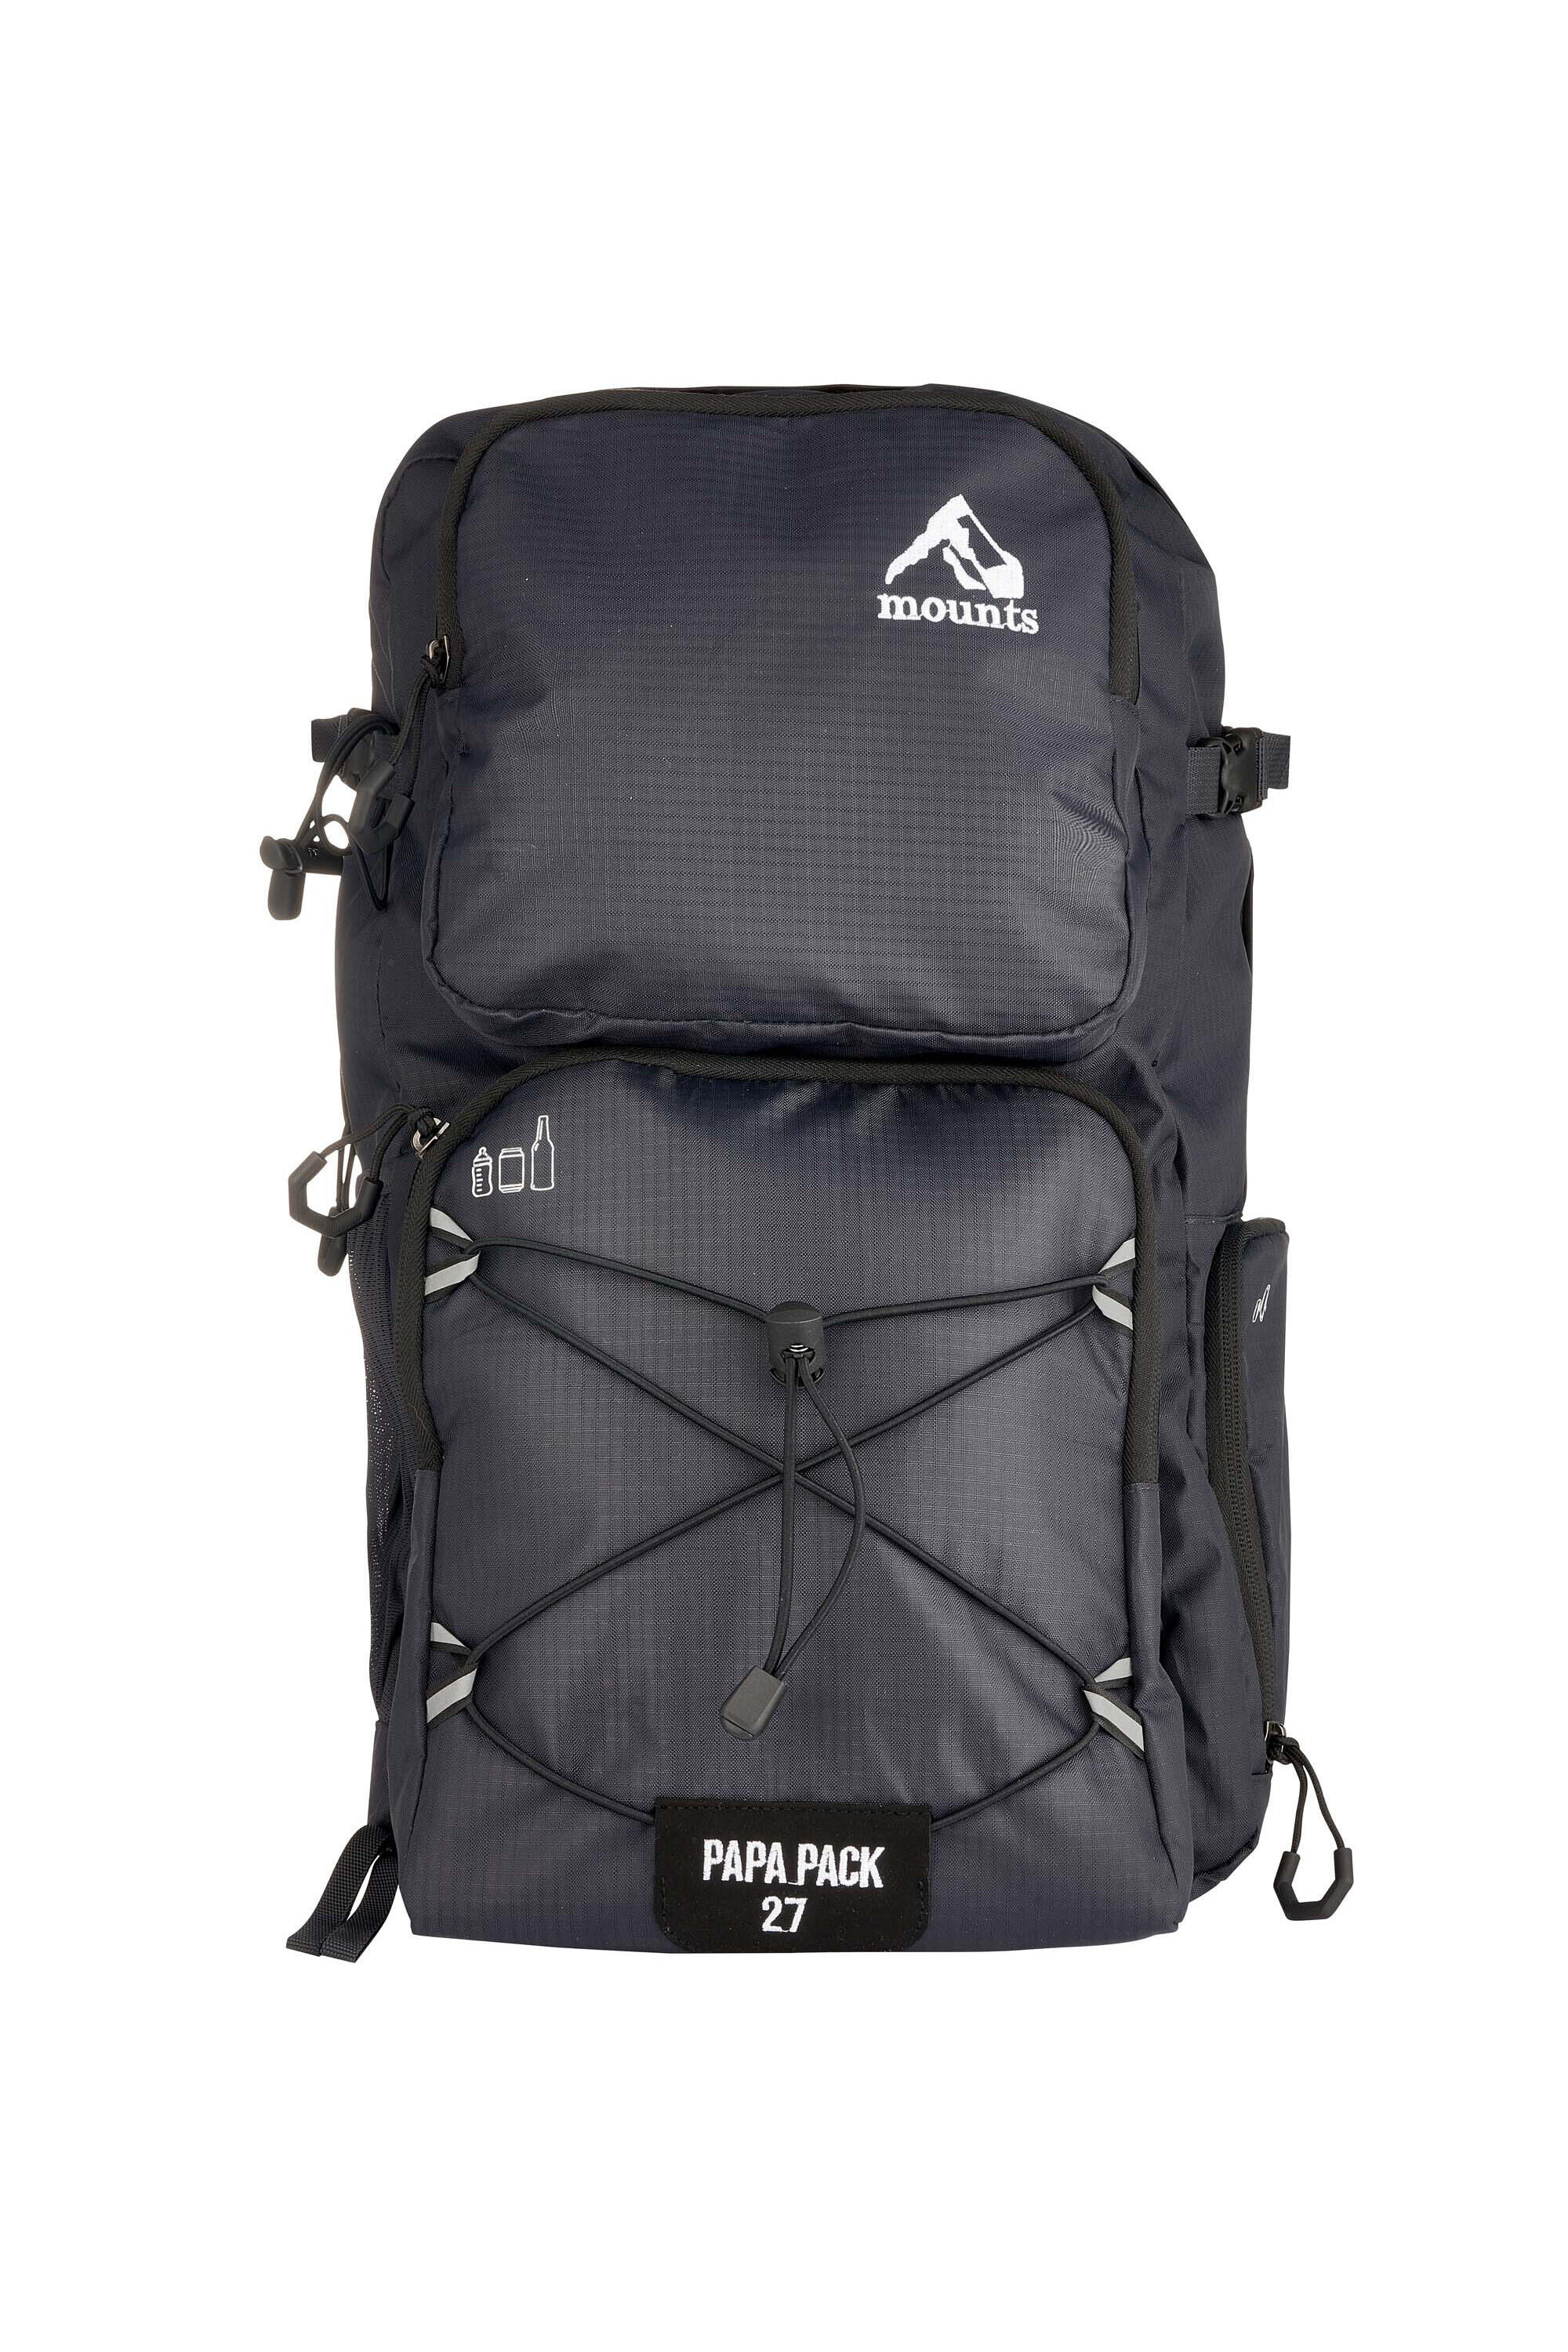 MOUNTS Papa Pack - Nappy Backpack - Changing Mat - Day Hiking Backpack - Cooler Pocket